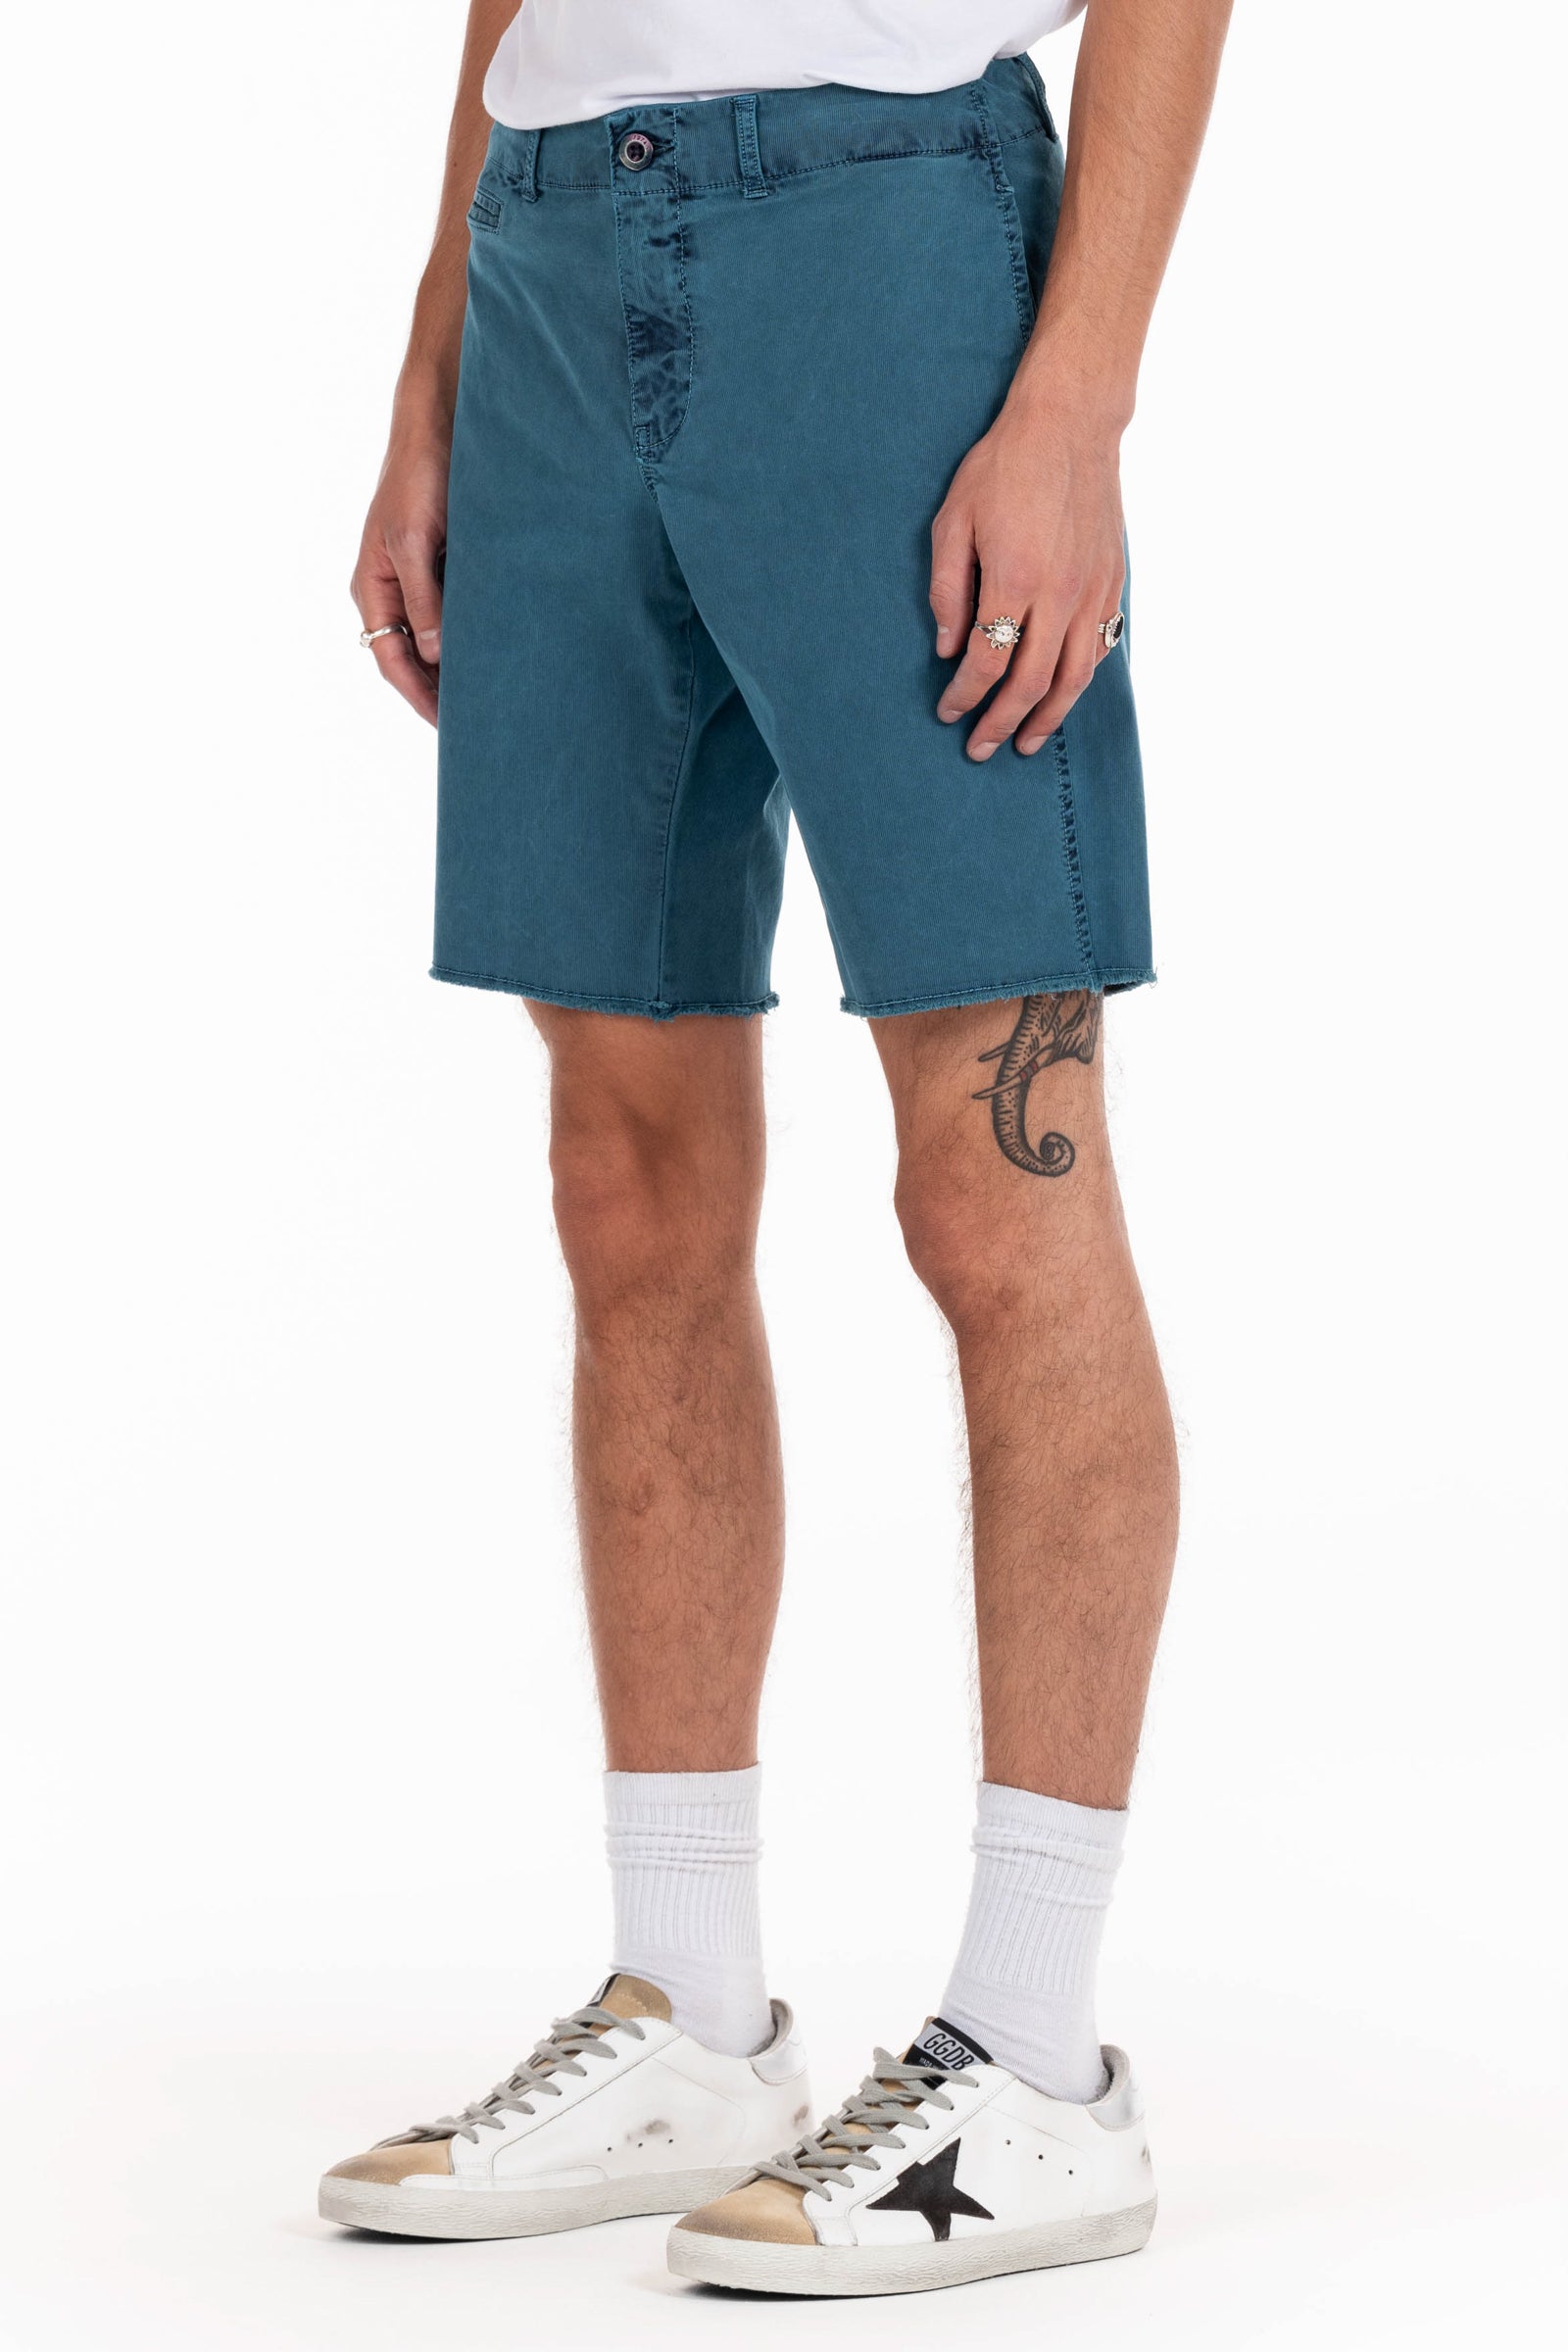 Original Paperbacks Rockland Chino Short in Dark Sea on Model Cropped Side View